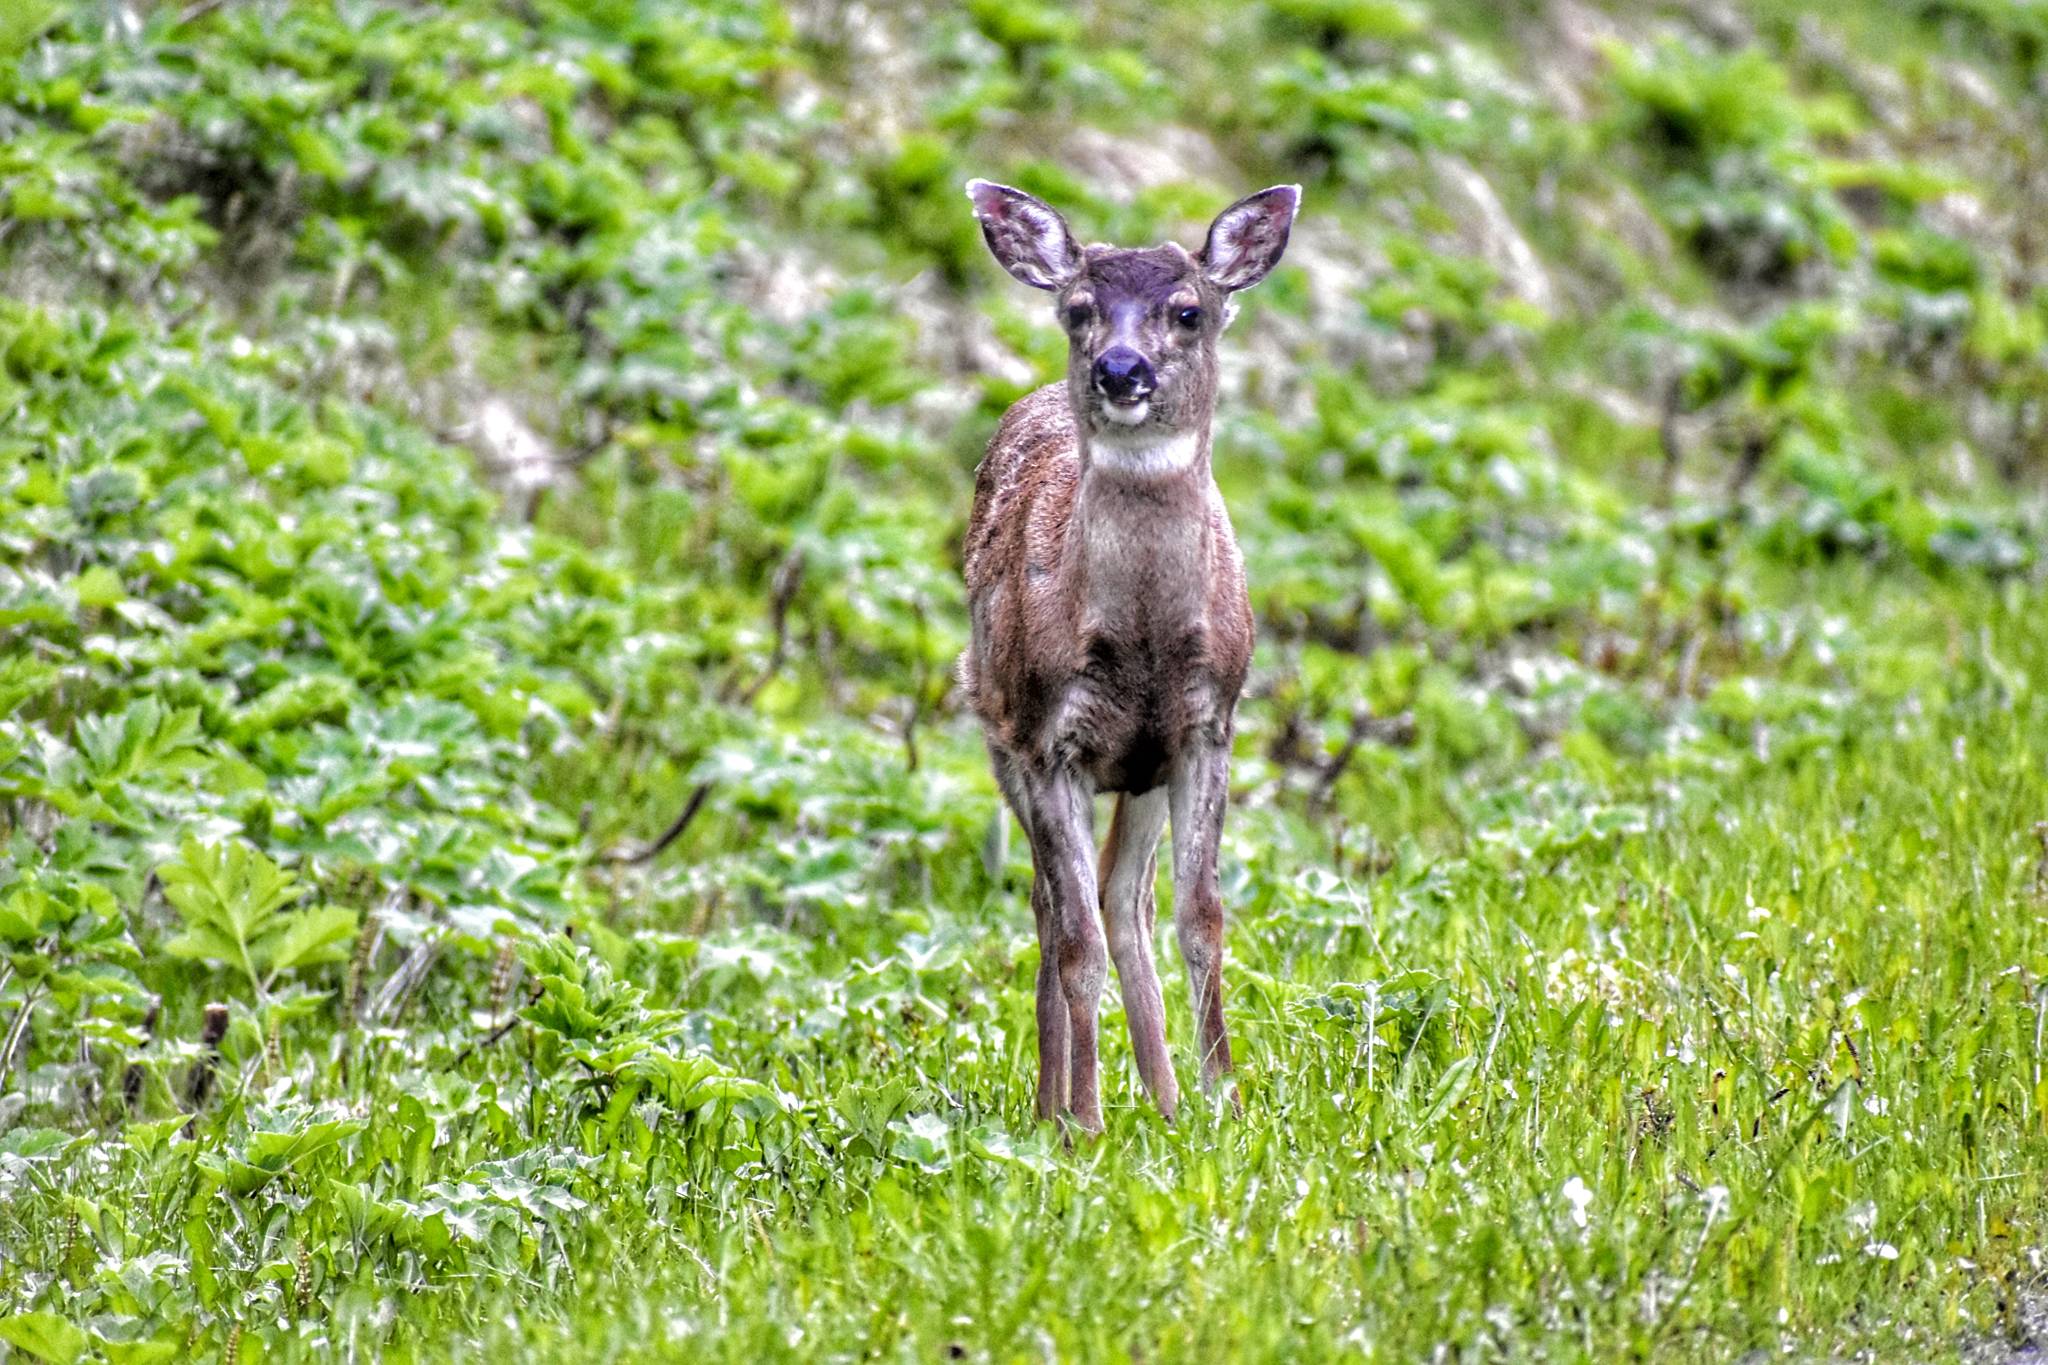 A deer poses for a picture near Breadline Bluff Trail on May 19, 2021. (Courtesy Photo / Virginia Kelly)